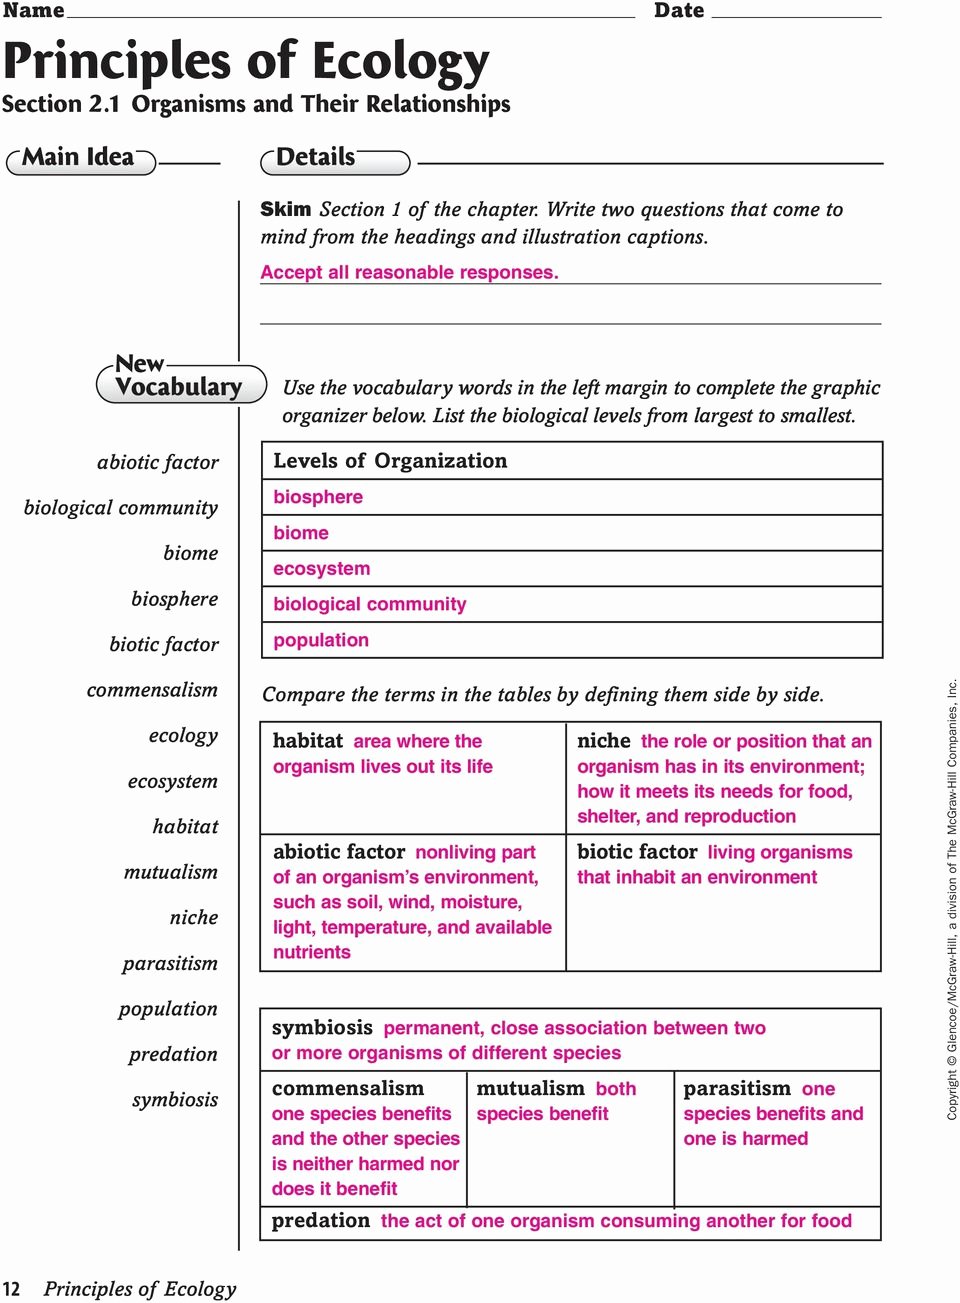 Principles Of Ecology Worksheet Answers Inspirational Principles Ecology Worksheet Breadandhearth